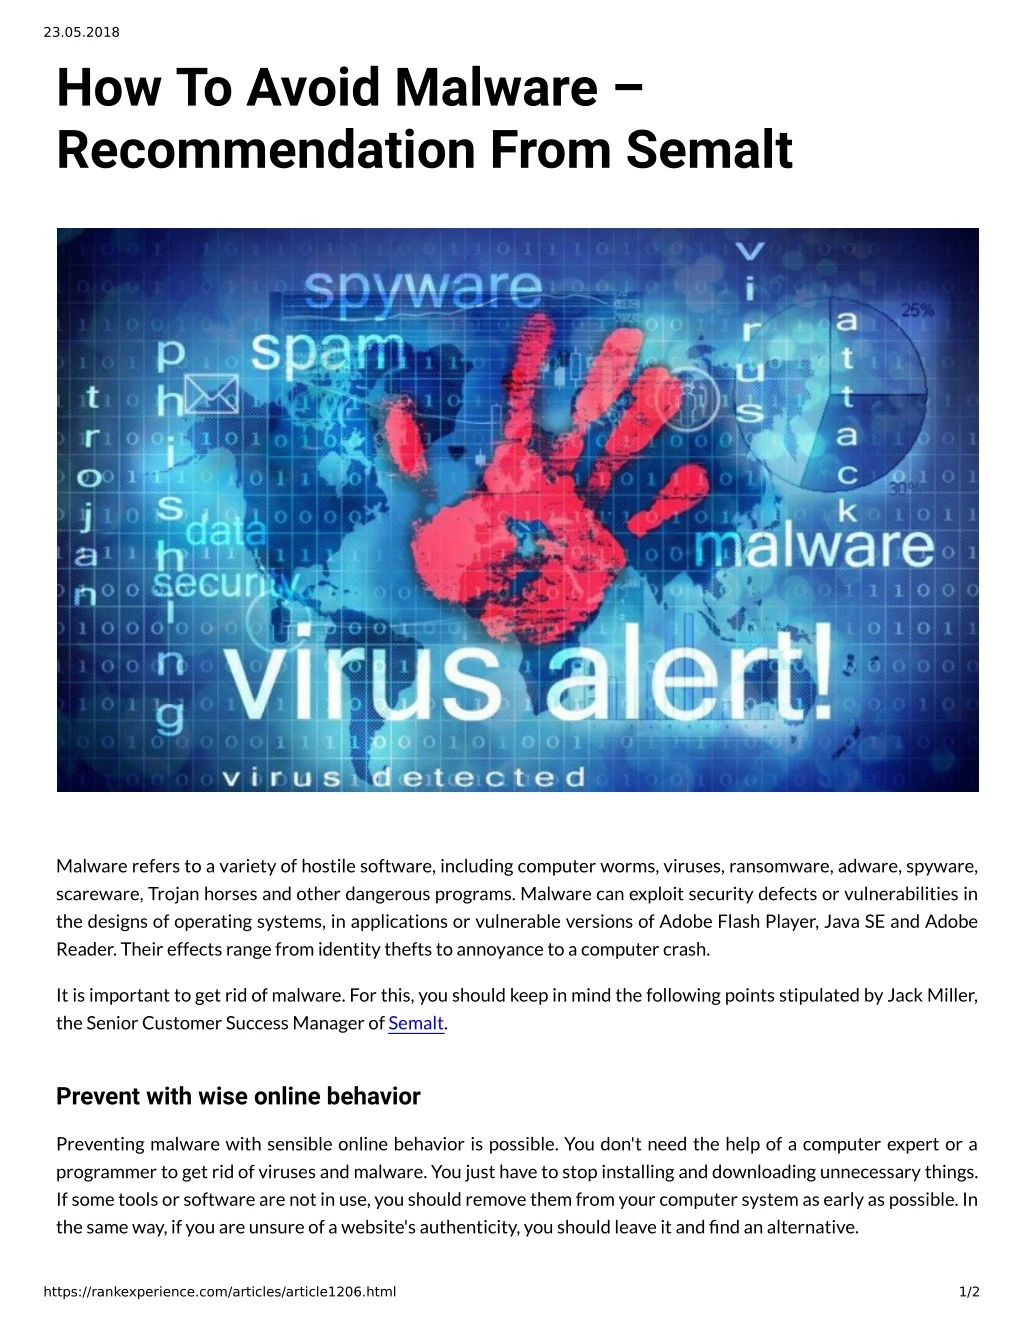 23 05 2018 how to avoid malware recommendation